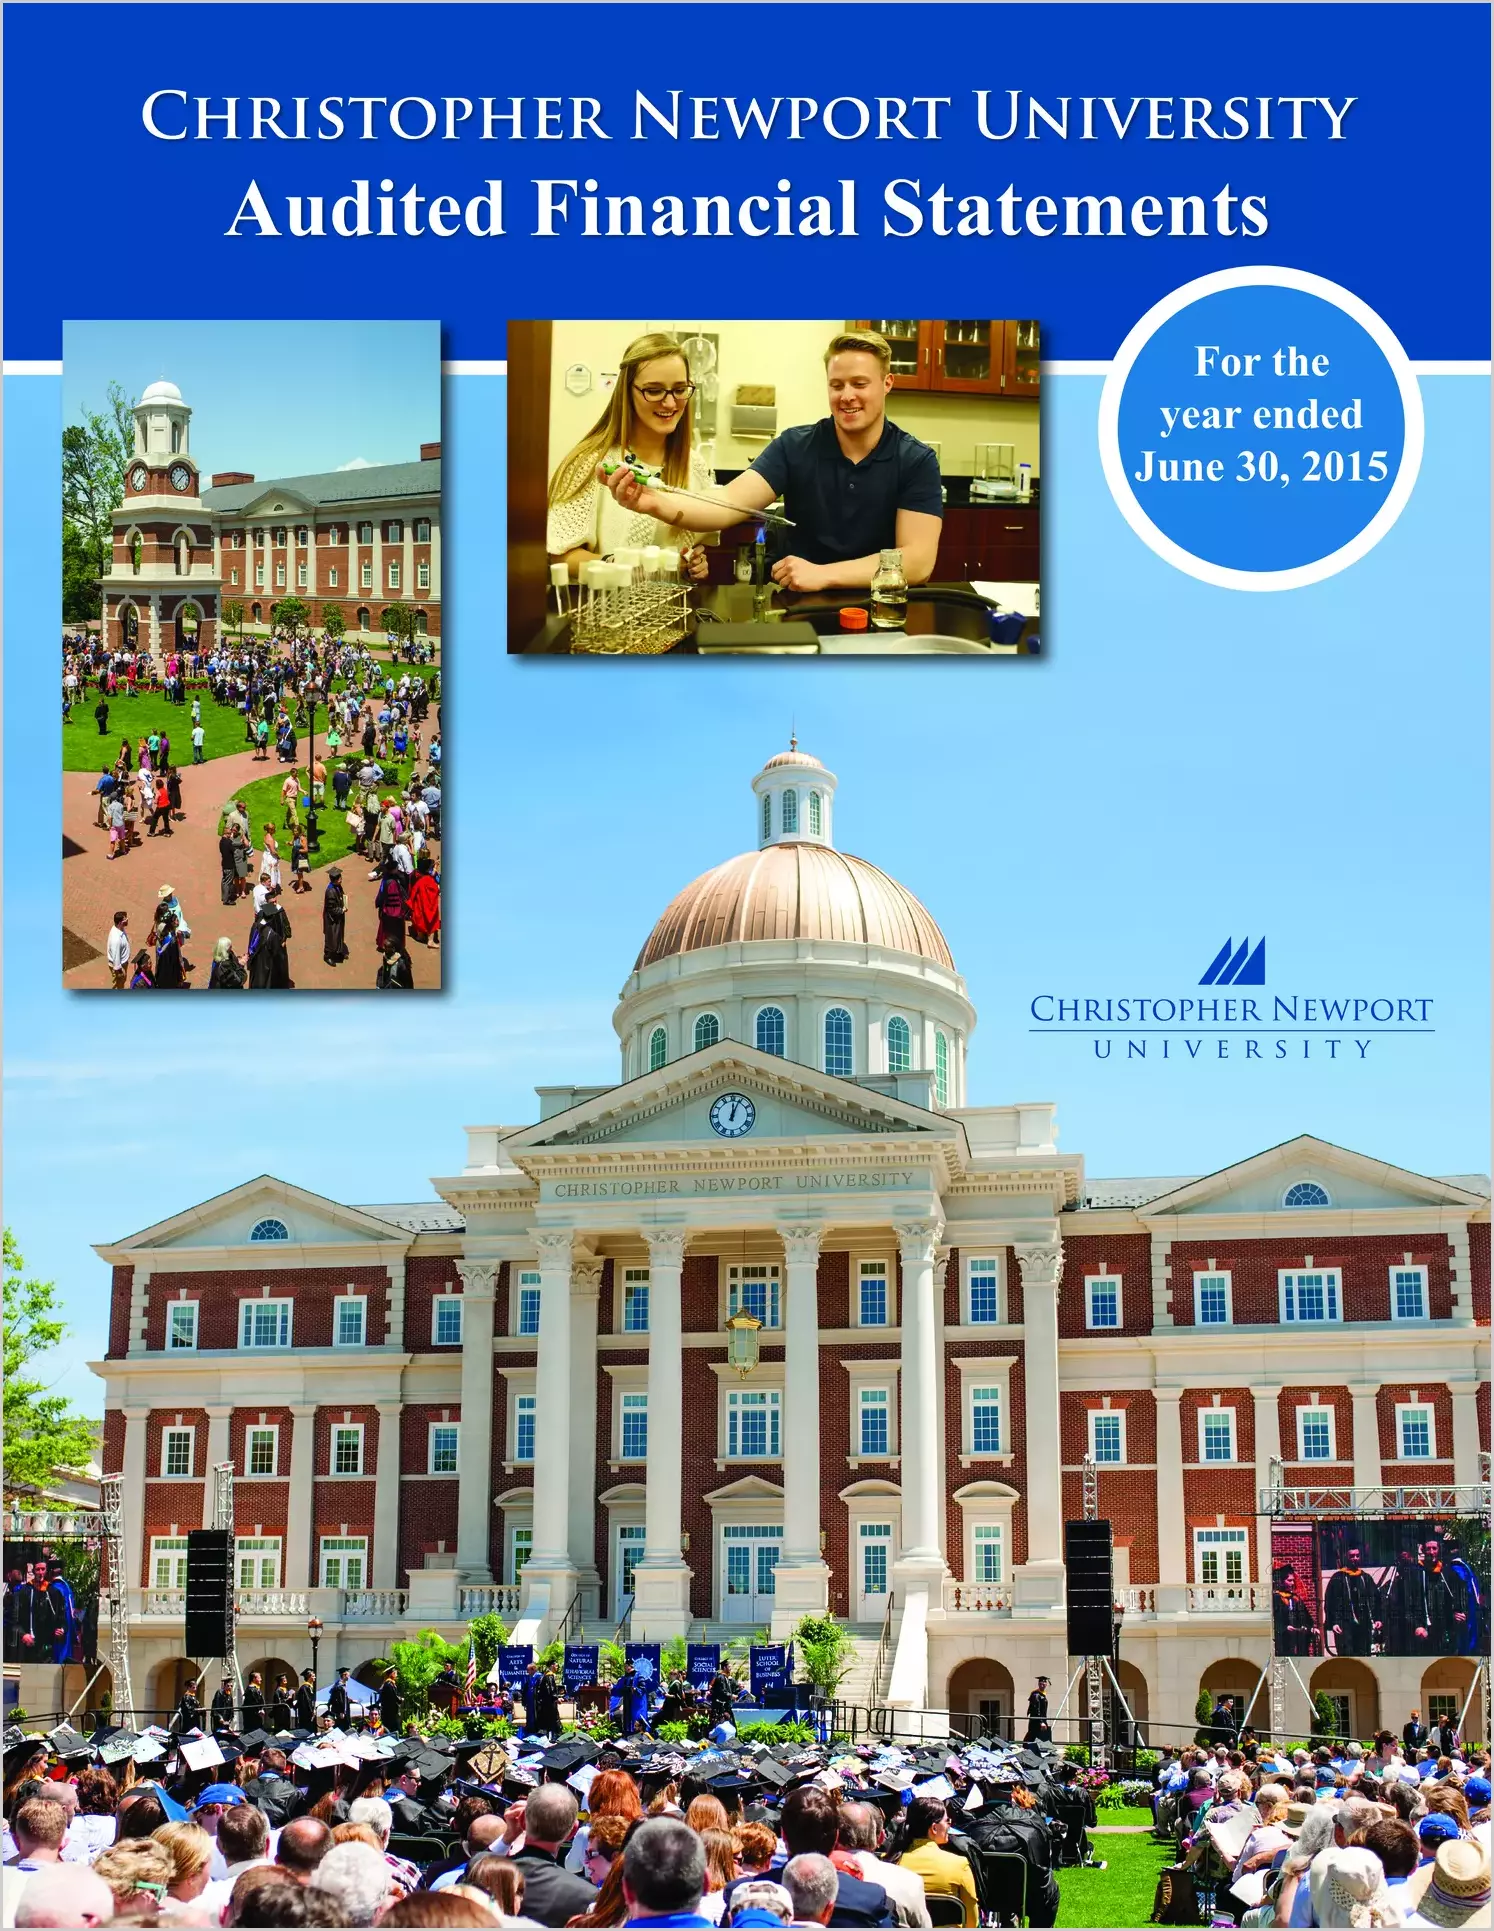 Christopher Newport University Financial Statements for the year ended June 30, 2015